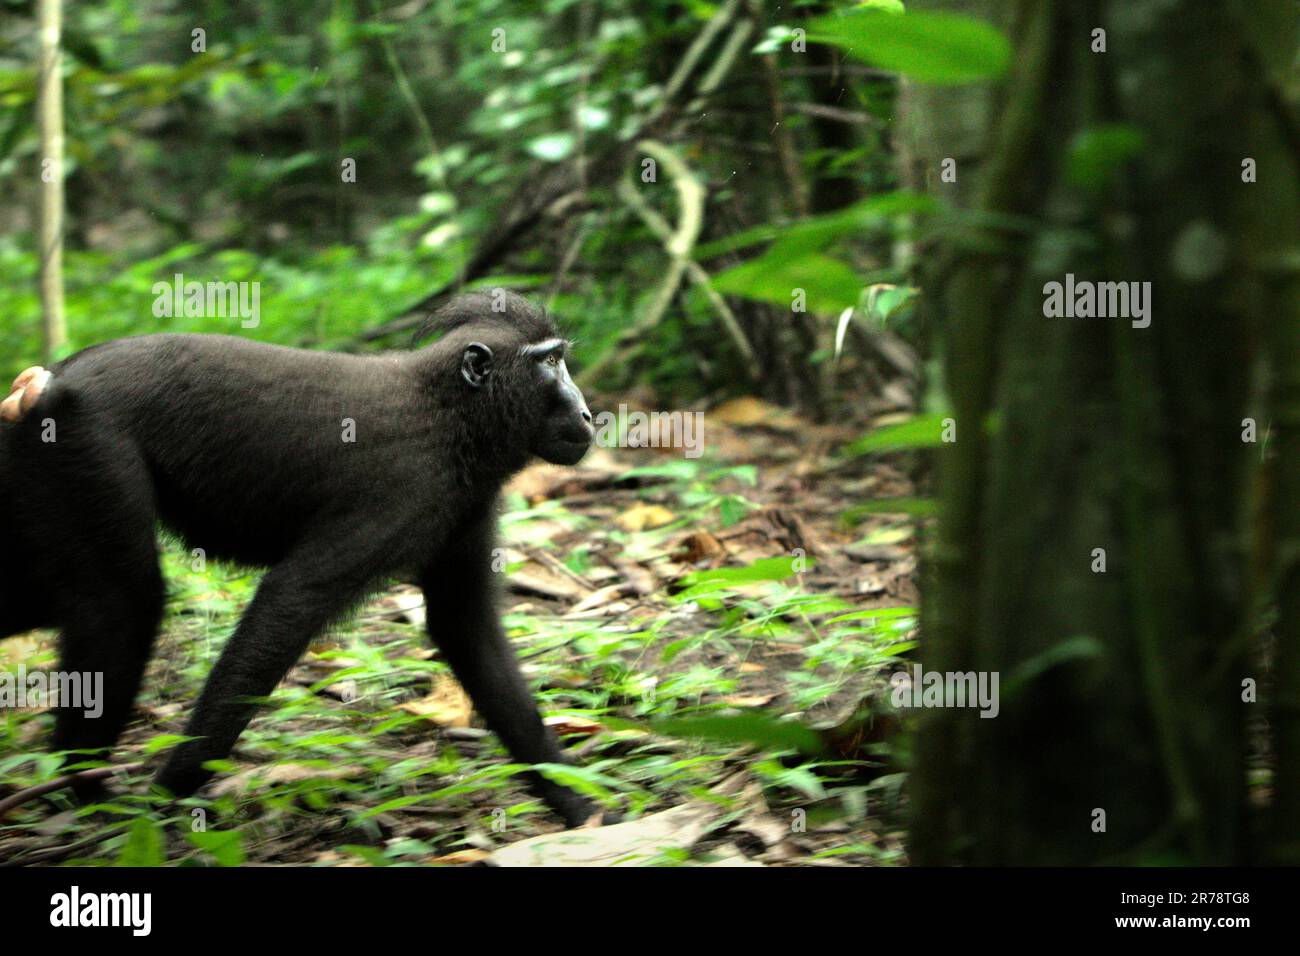 A Celebes crested macaque (Macaca nigra) is moving on the ground in Tangkoko forest, North Sulawesi, Indonesia. Climate change may reduce the habitat suitability and geographic distribution of primate species, according to scientists. Stock Photo